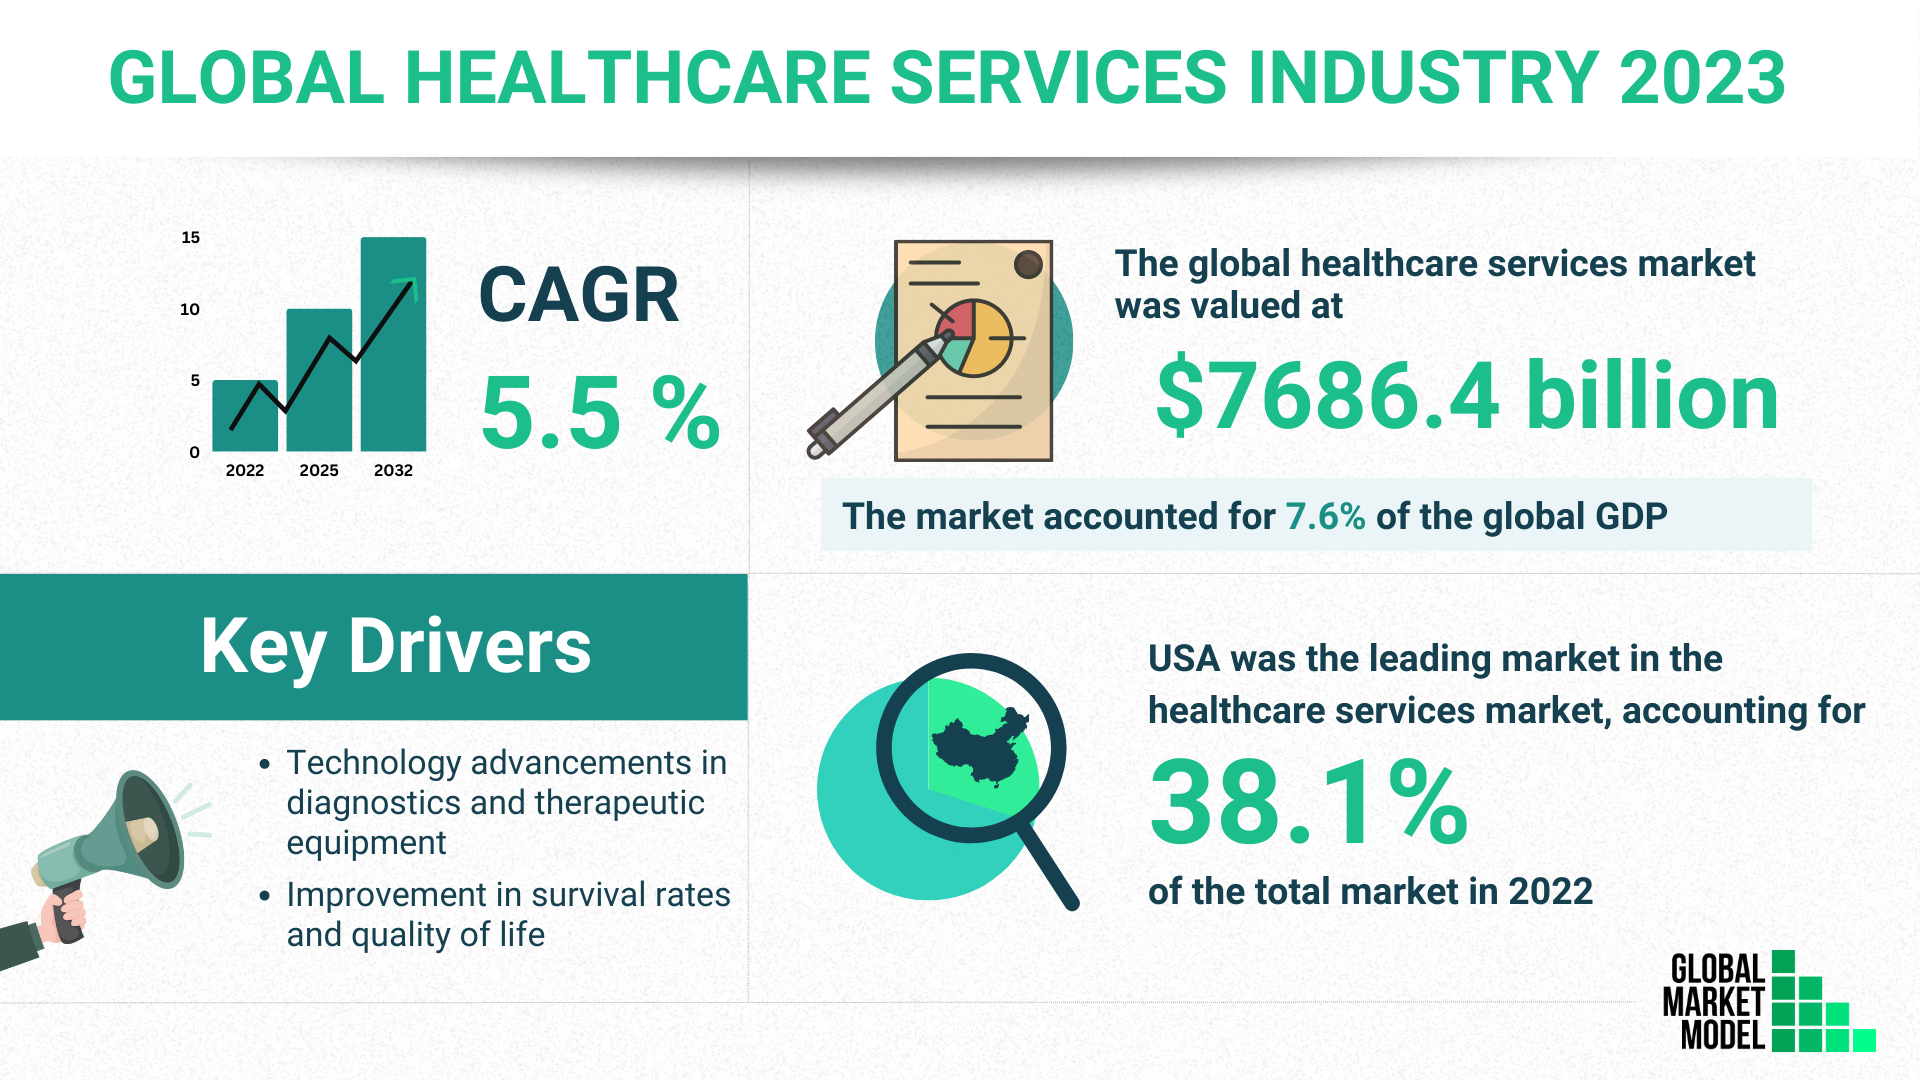 Global Healthcare Services Industry 2023